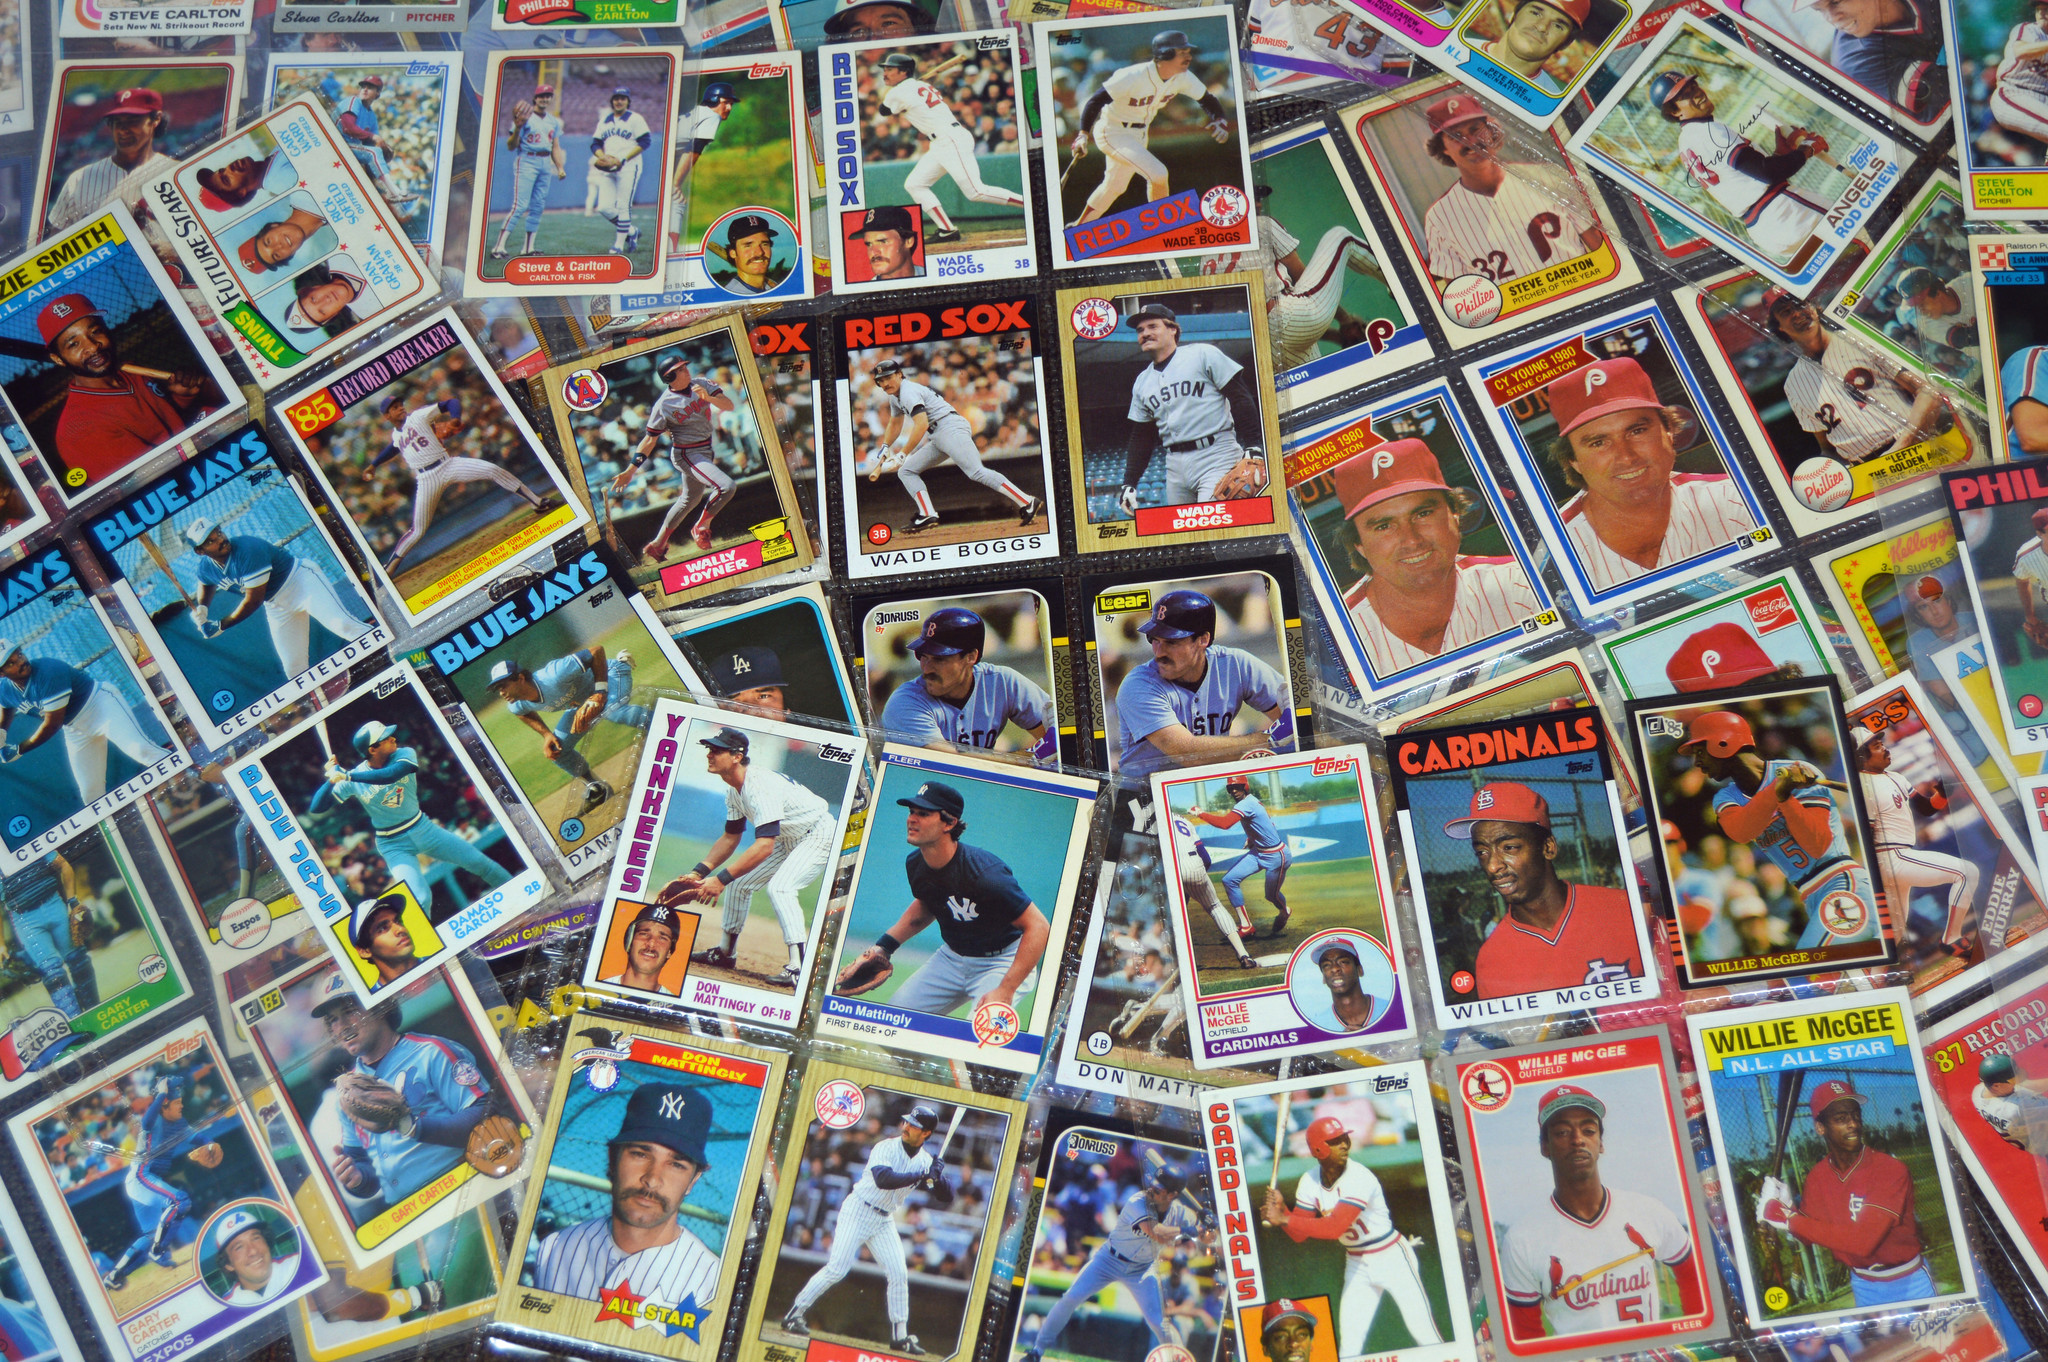 Is my baseball card collection worth anything? Chicago Tribune